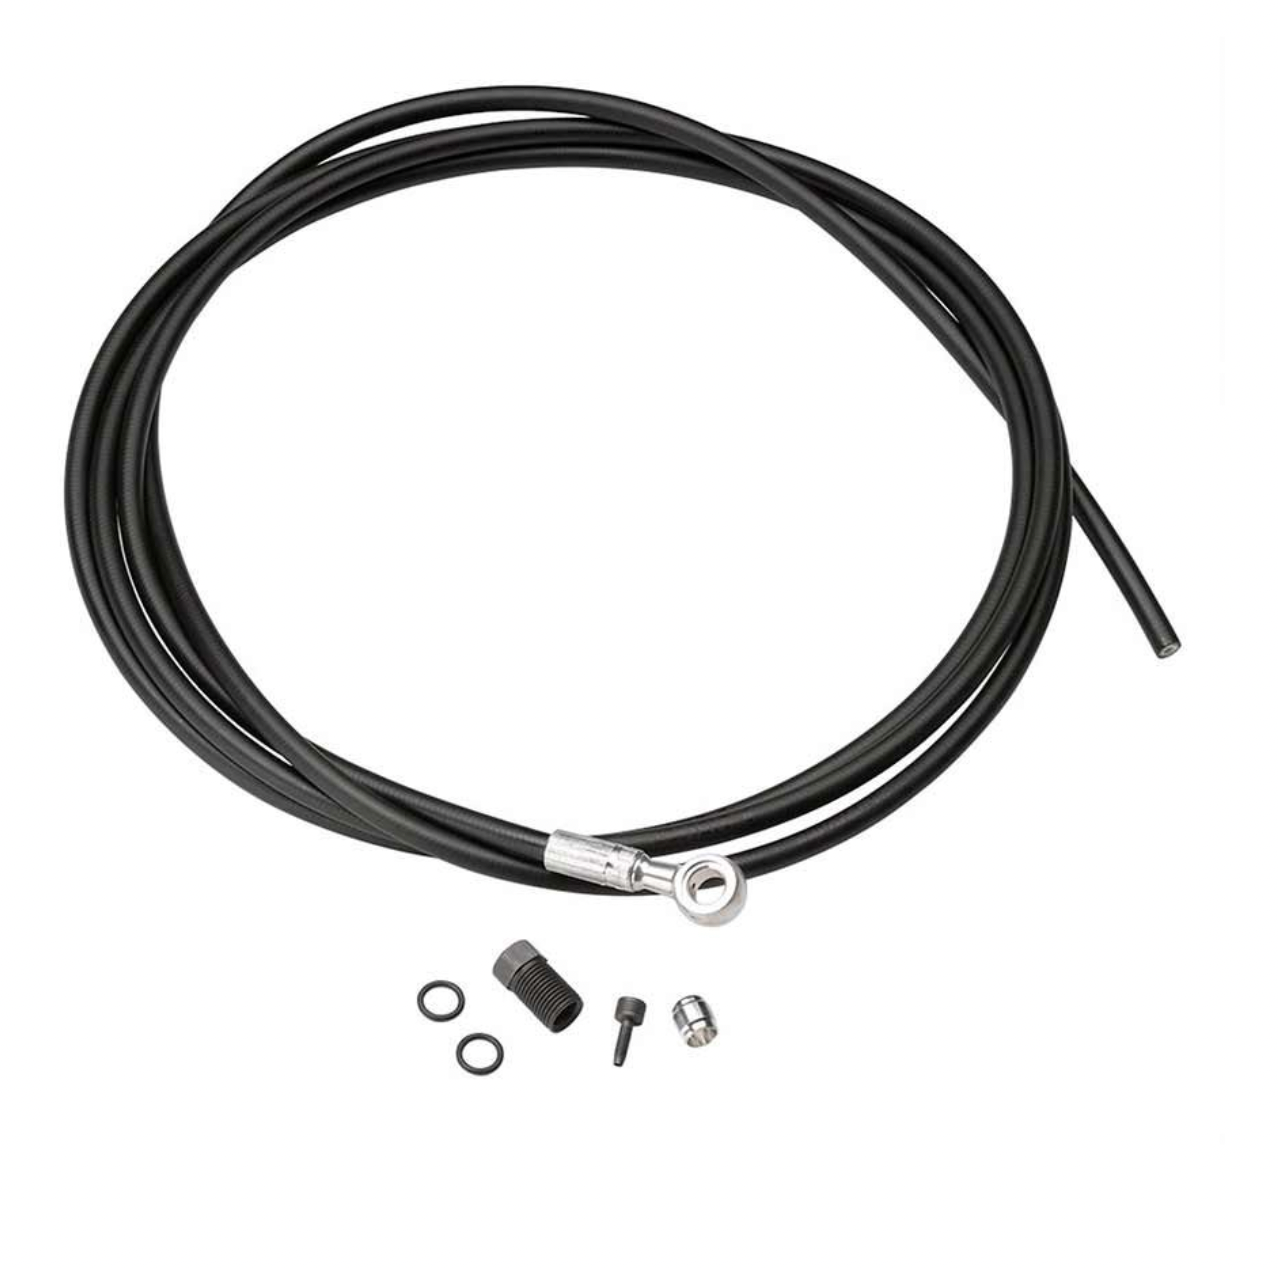 SRAM - Guide Ultimate, Hydraulic line kit, 2000mm